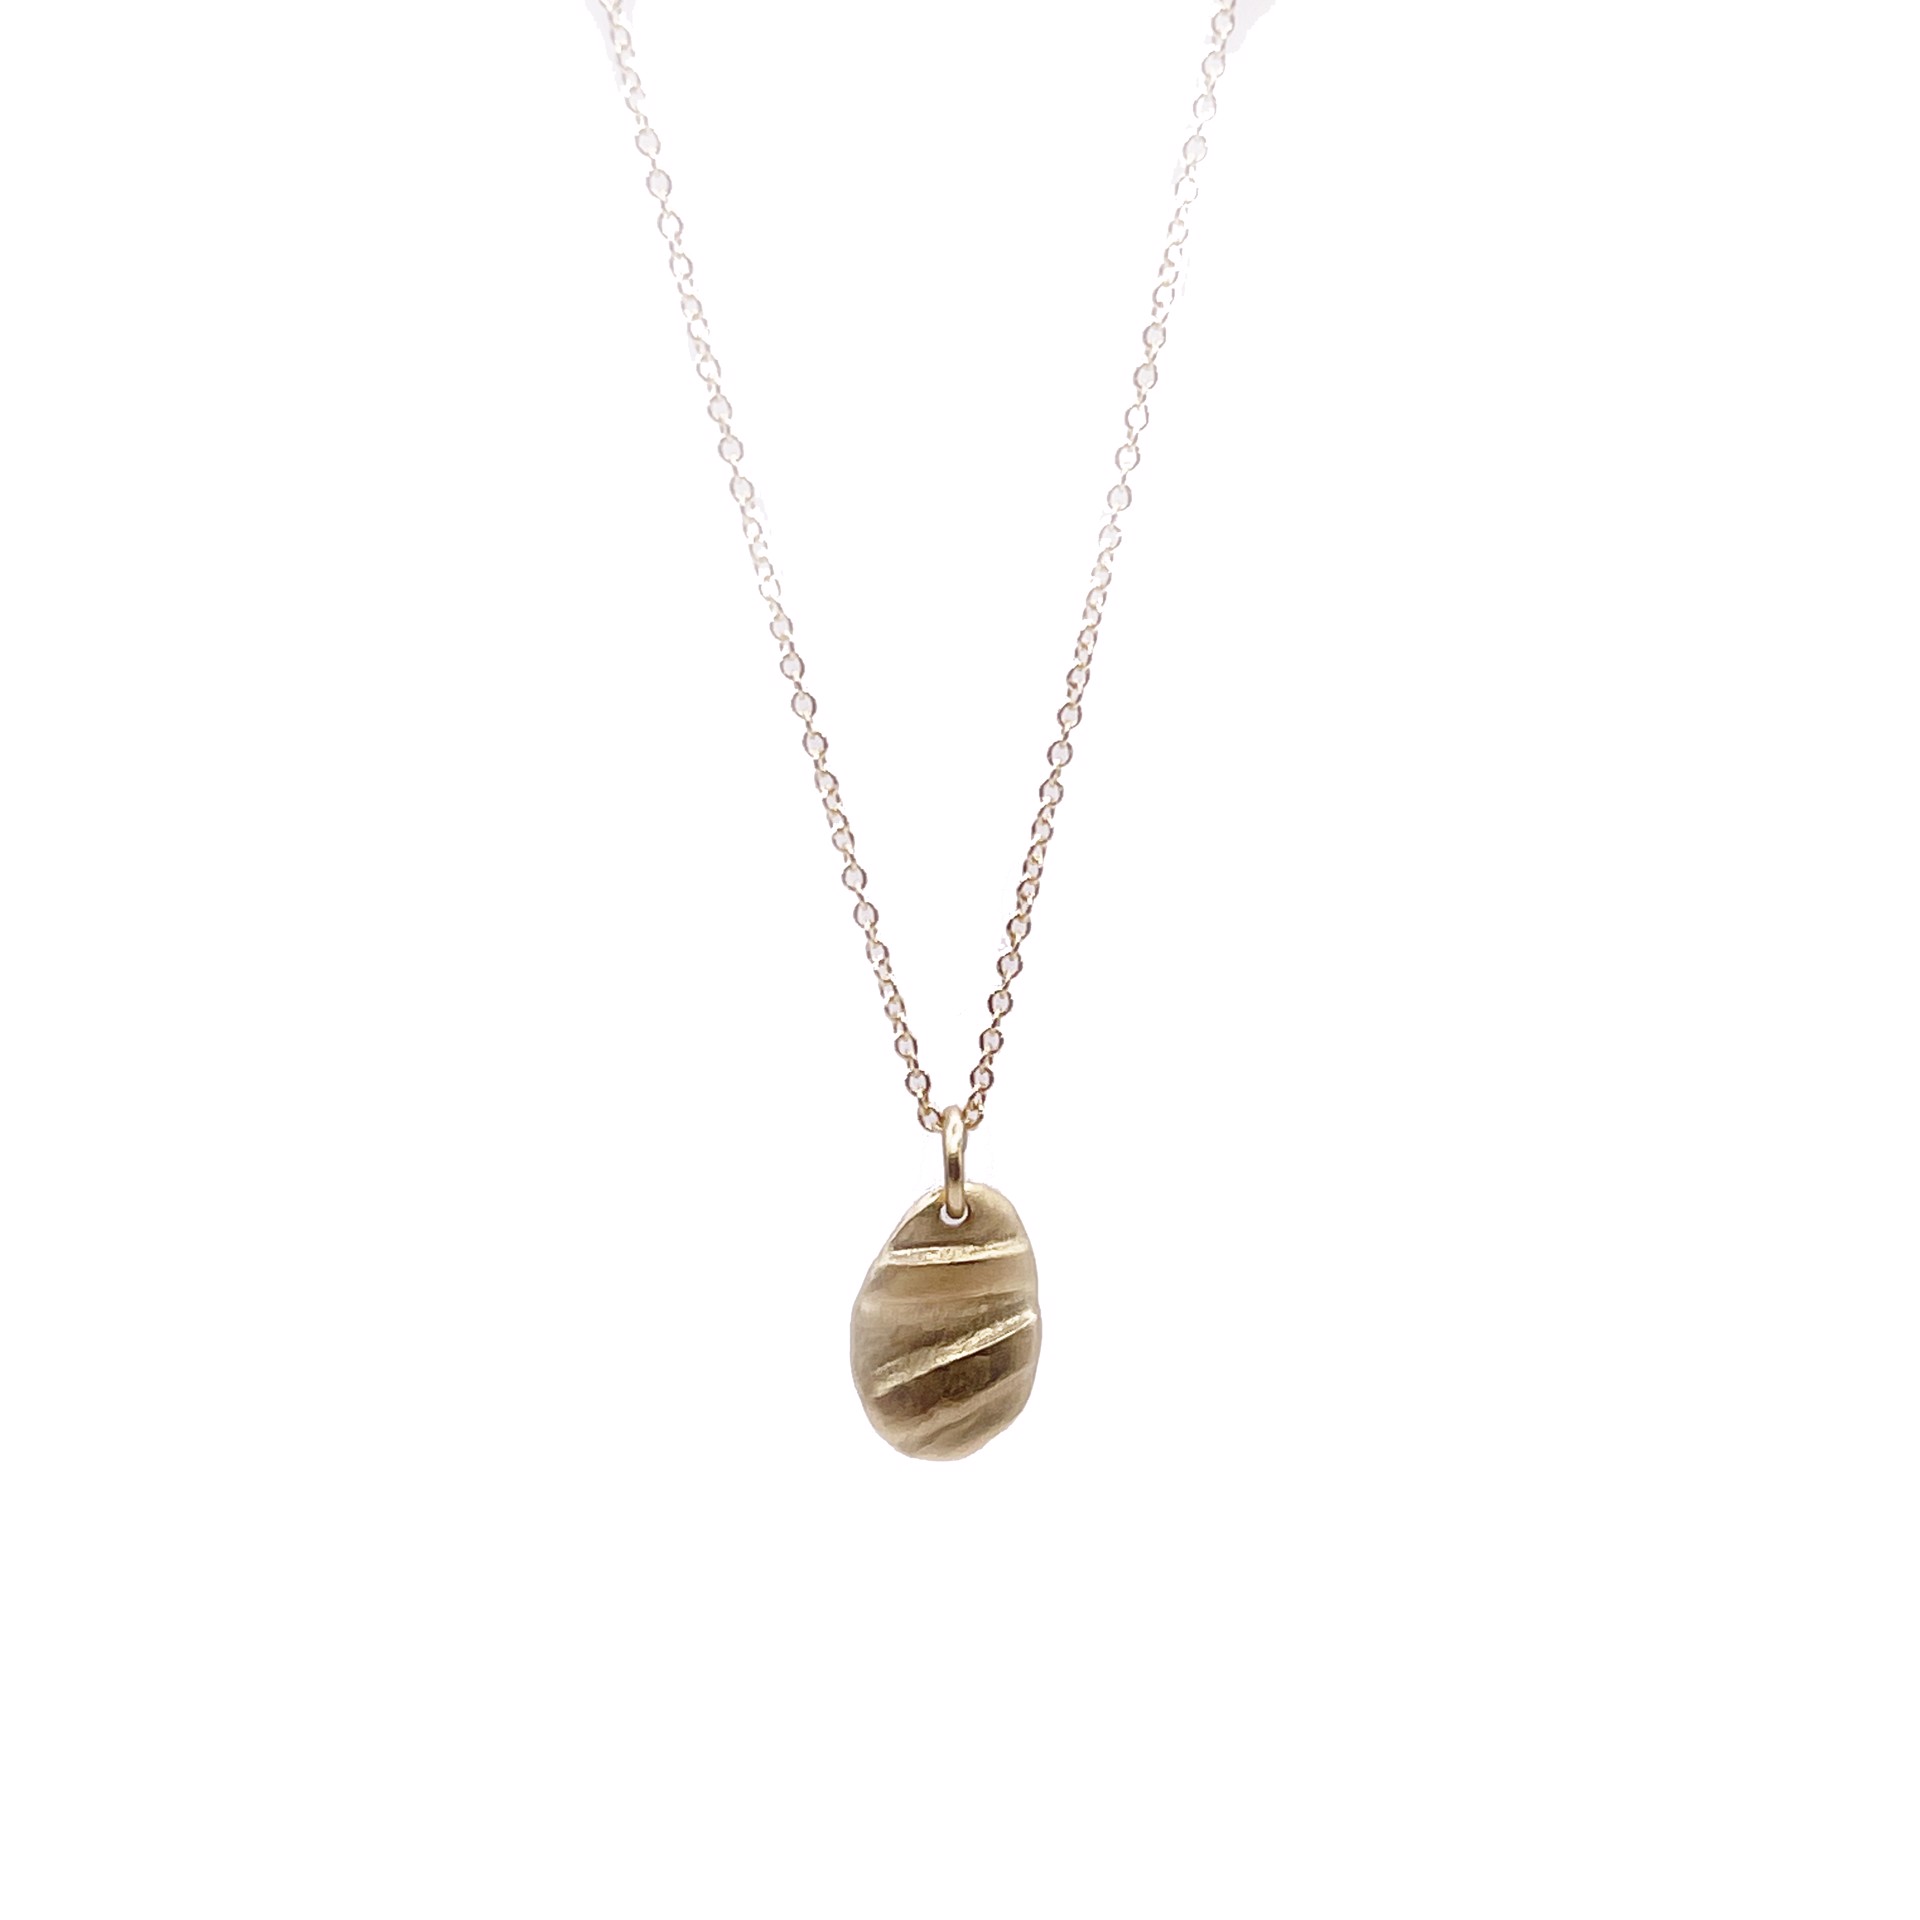 LLN6- Lifeline Small Pendant Necklace on Thin Cable Chain (18k Gold) by Leandra Hill